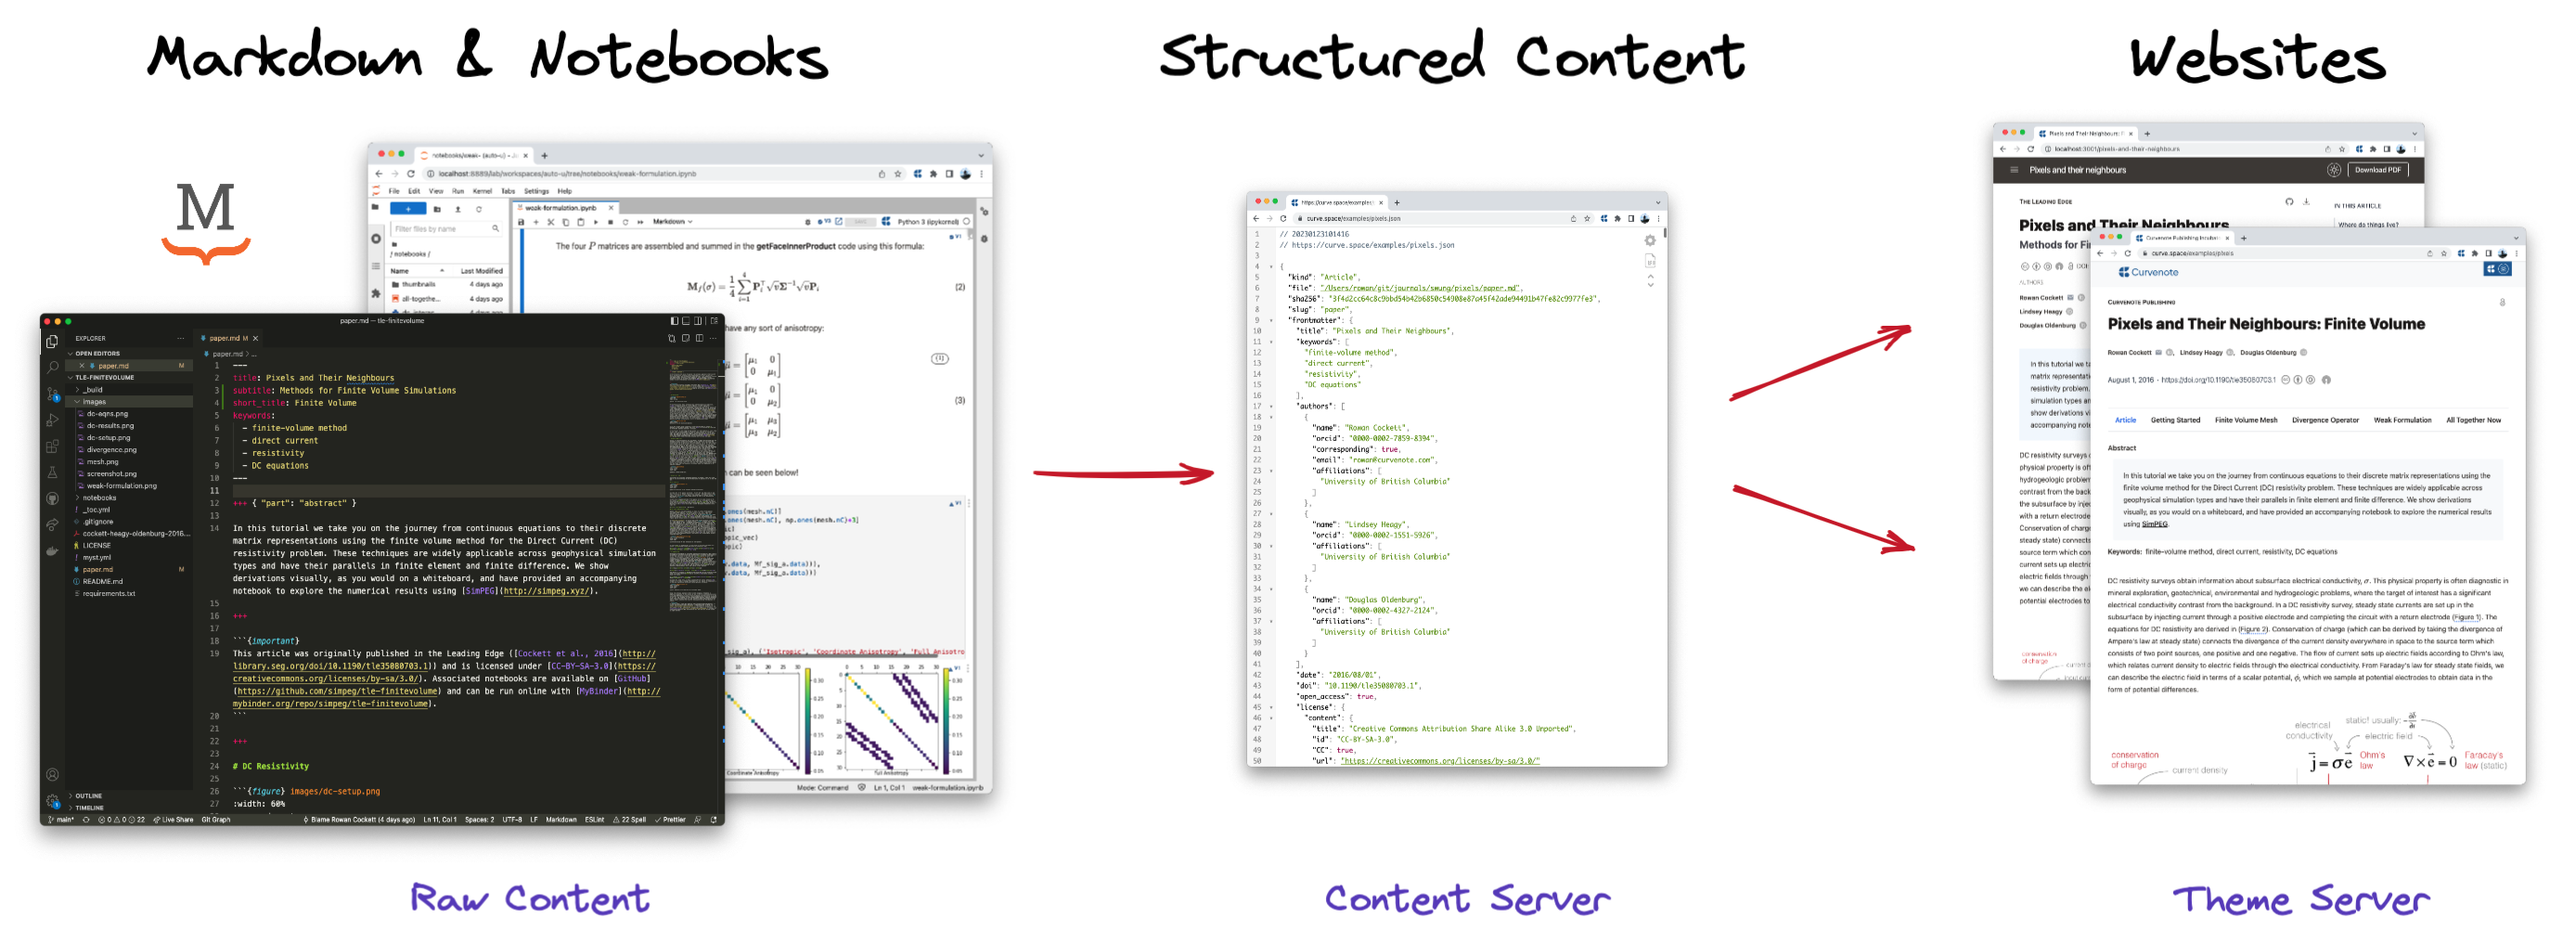 Markdown documents and Jupyter Notebooks are transformed into structured data. The structured data is served by a “content server” and accessed directly by a “theme server” to create a dynamic and interactive website, allowing you to switch out the theme on the fly!